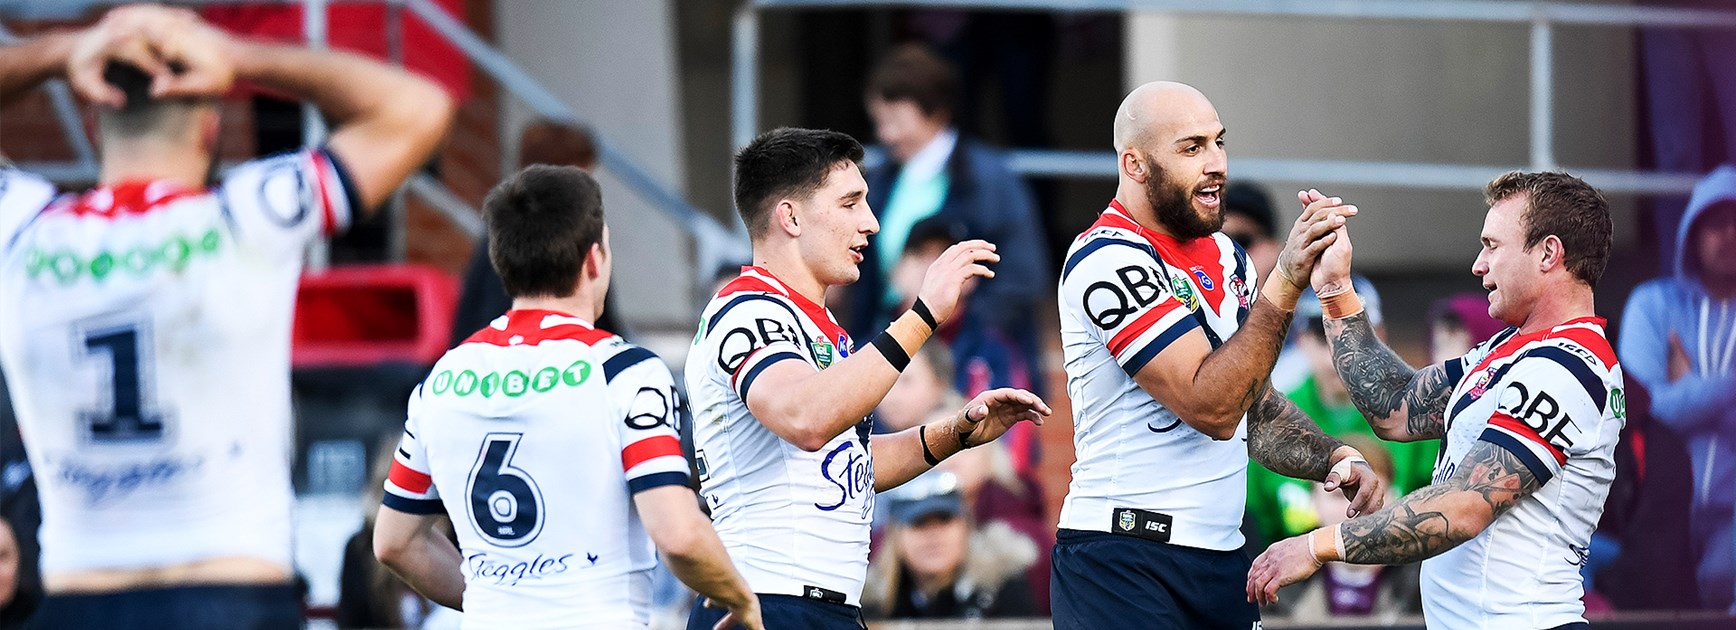 Mitchell stars as Roosters thrash Sea Eagles